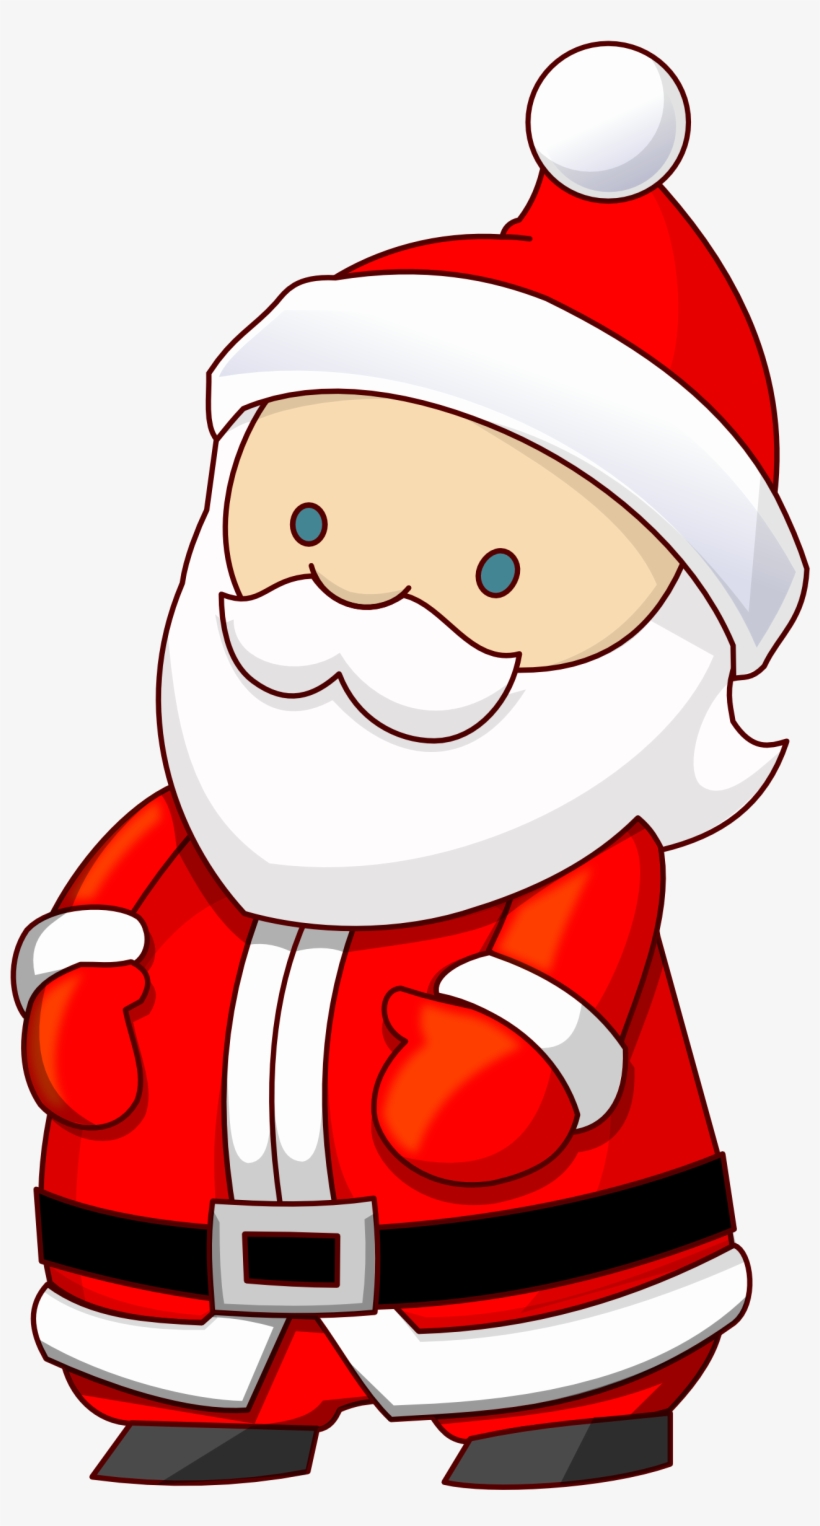 Free To Use Public Domain Christmas Clip Art - Santa Claus Gif Png, transparent png #9852